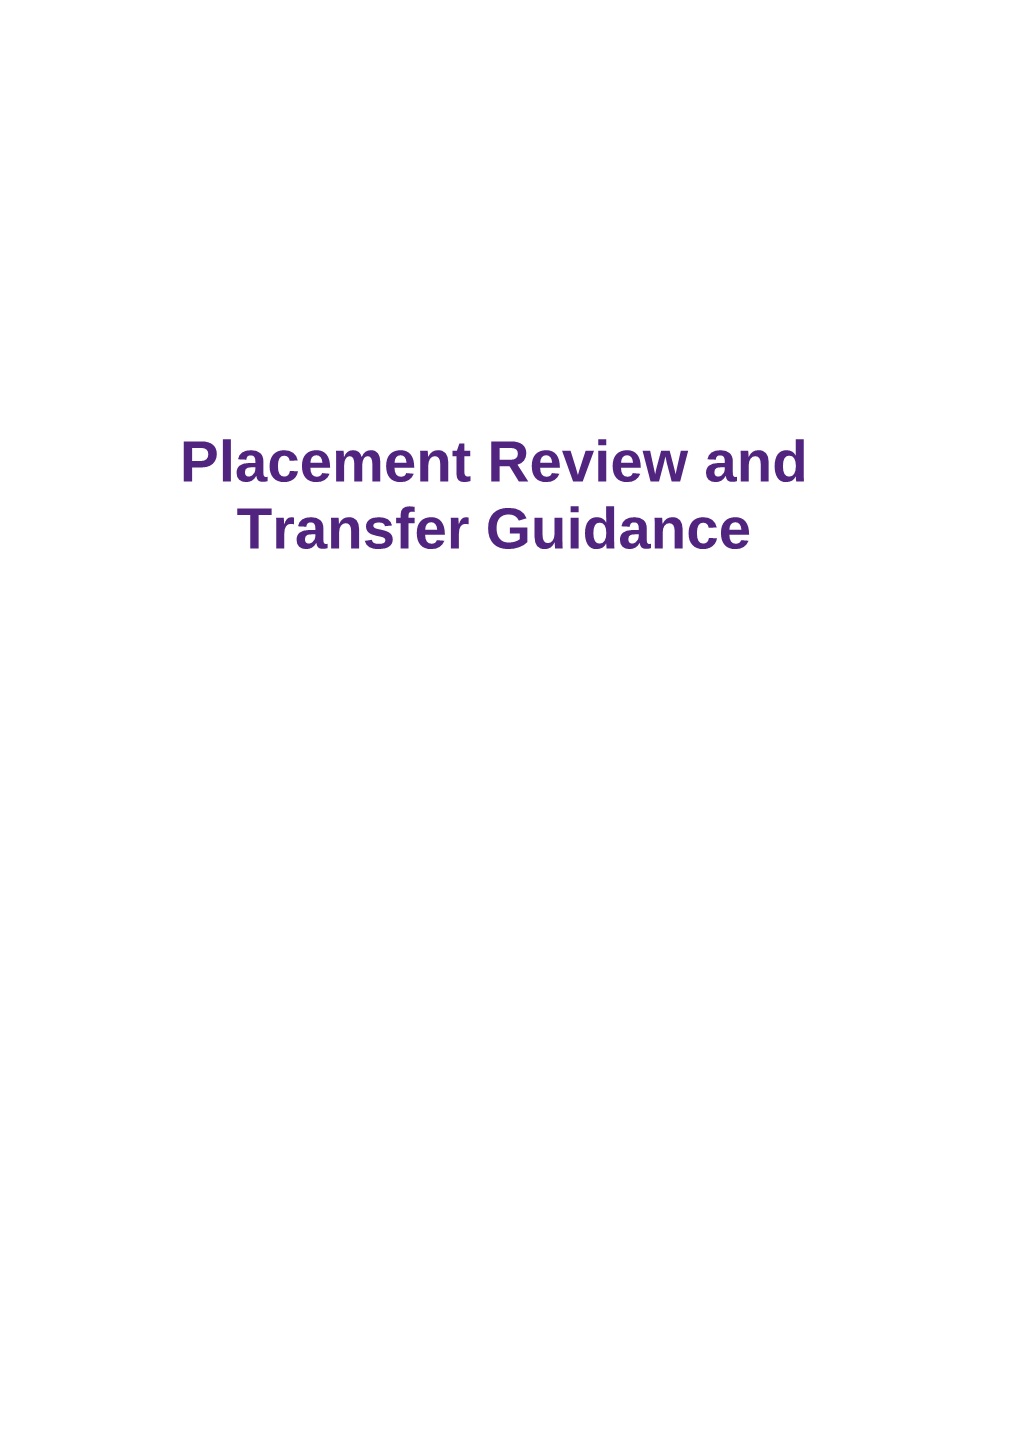 Placement Review and Transfer Guidance